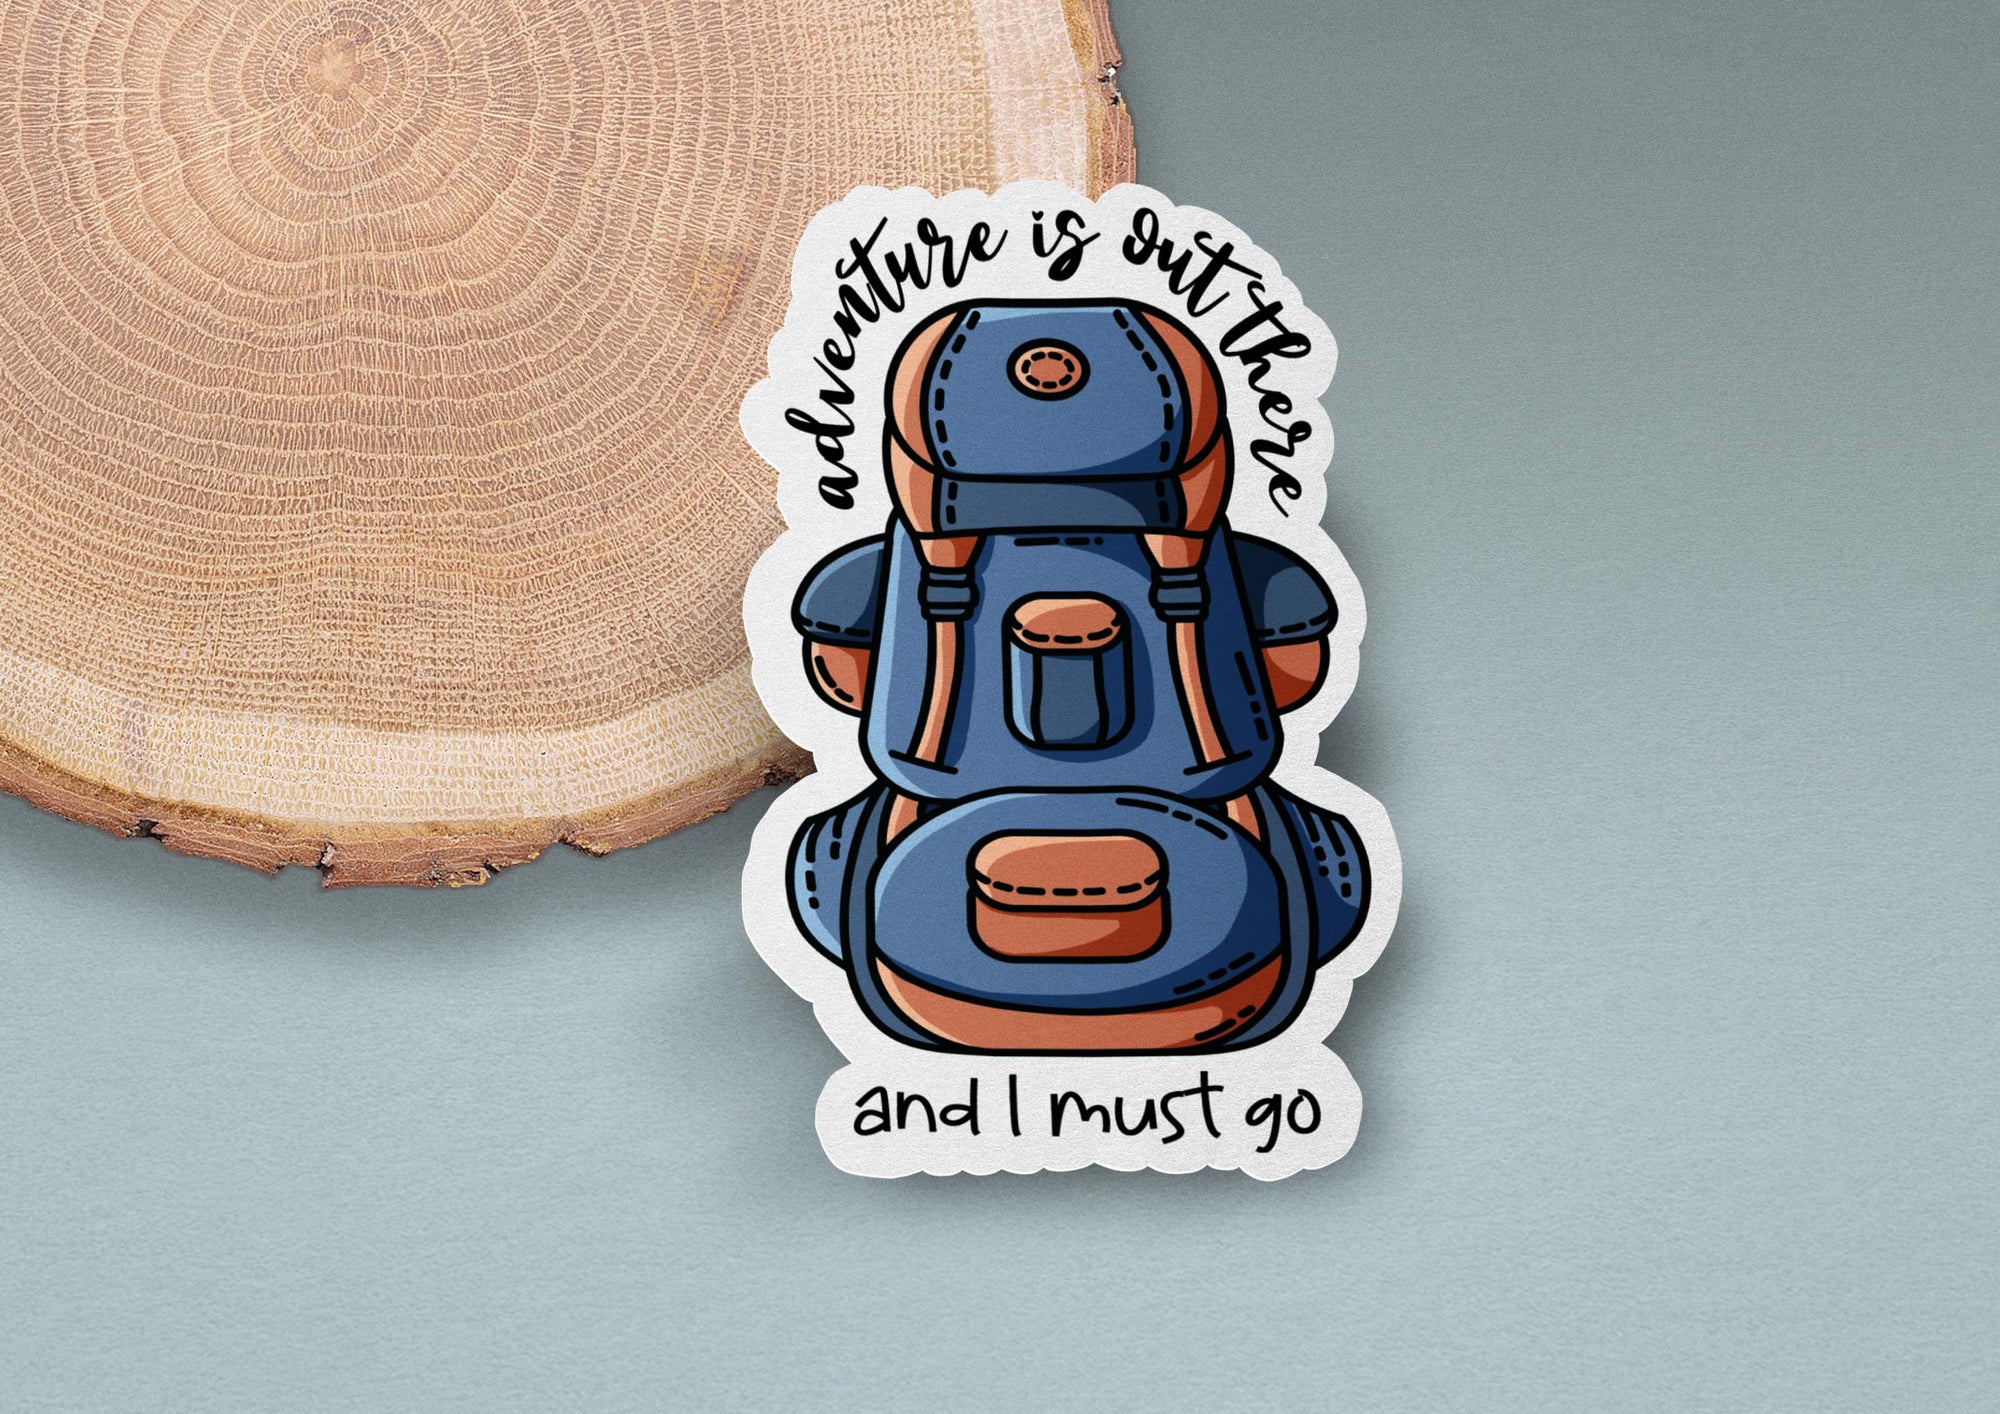 Adventure Is Out There Sticker